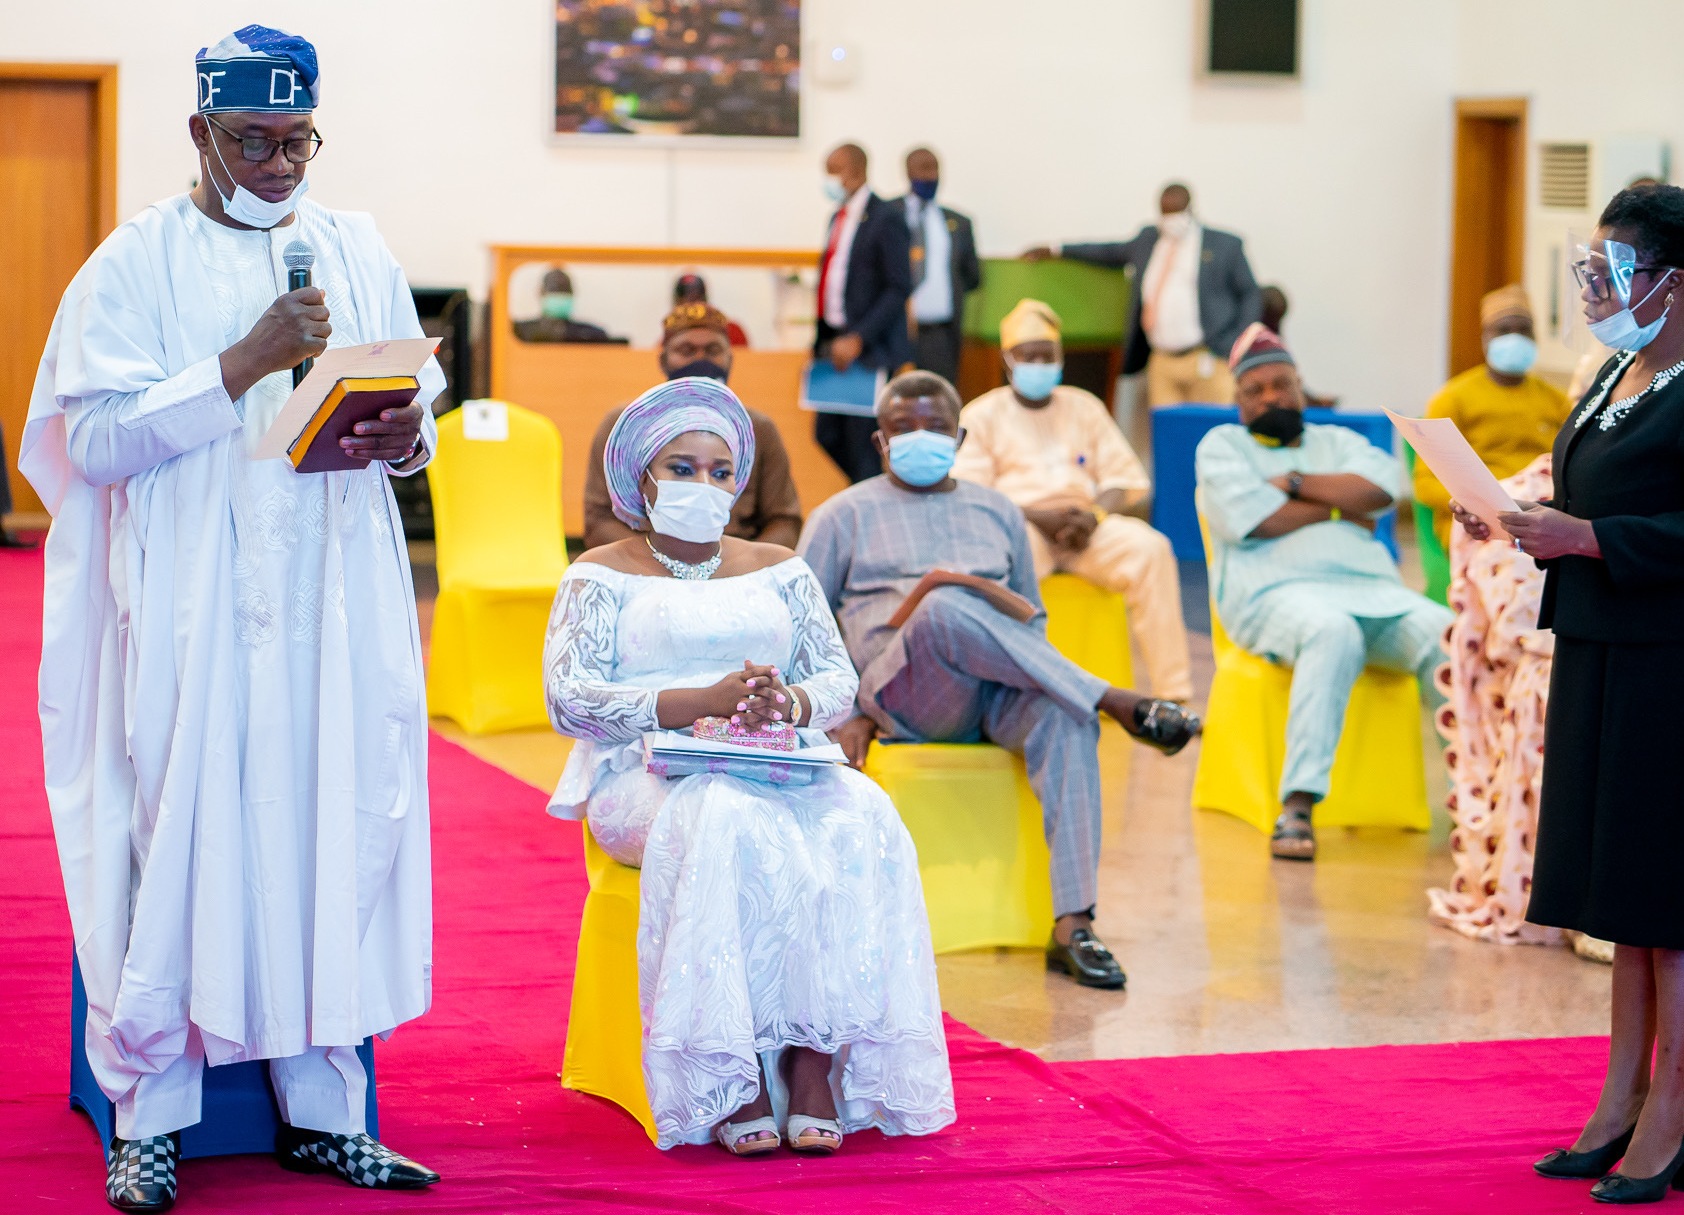 3844: New Chairman of Agbado-Oke Odo LCDA, Mr. David Famuyiwa (left), taking his Oath of Office, presided over by Lagos State Governor, Mr. Babajide Sanwo-Olu, at Lagos House, Alausa, Ikeja, on Tuesday, June 30, 2020. Seated by him is his wife, Abiodun.